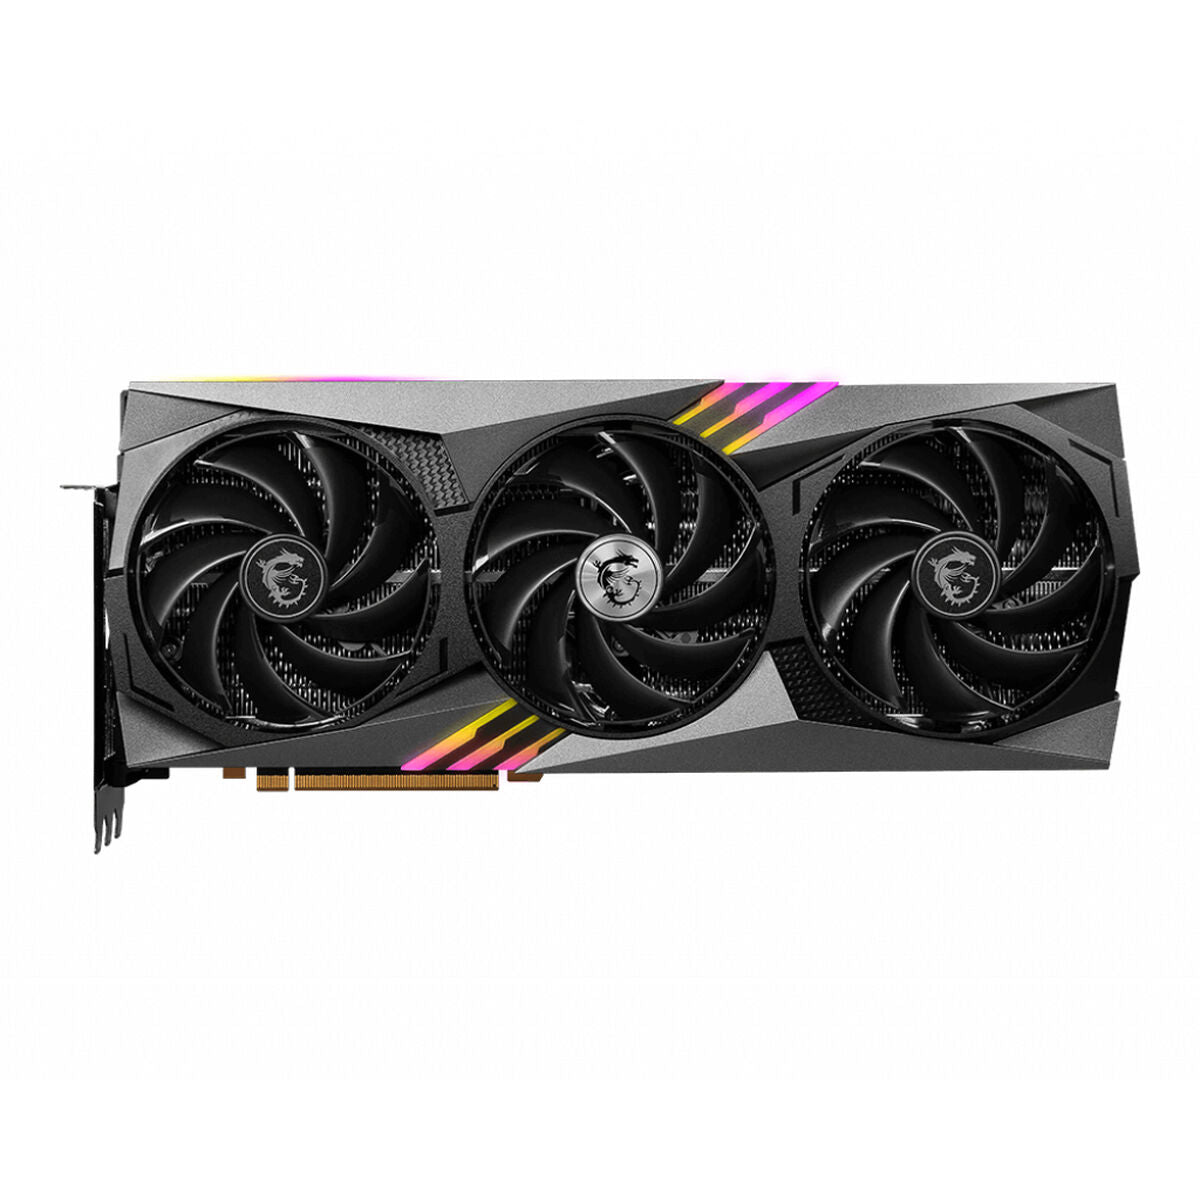 Graphics card MSI RTX 4090 GAMING X NVIDIA GeForce RTX 4090 GDDR6X, MSI, Computing, Components, graphics-card-msi-rtx-4090-gaming-x-nvidia-geforce-rtx-4090-gddr6x, Brand_MSI, category-reference-2609, category-reference-2803, category-reference-2812, category-reference-t-19685, category-reference-t-19912, category-reference-t-21360, category-reference-t-25665, computers / components, Condition_NEW, Price_+ 1000, Teleworking, RiotNook